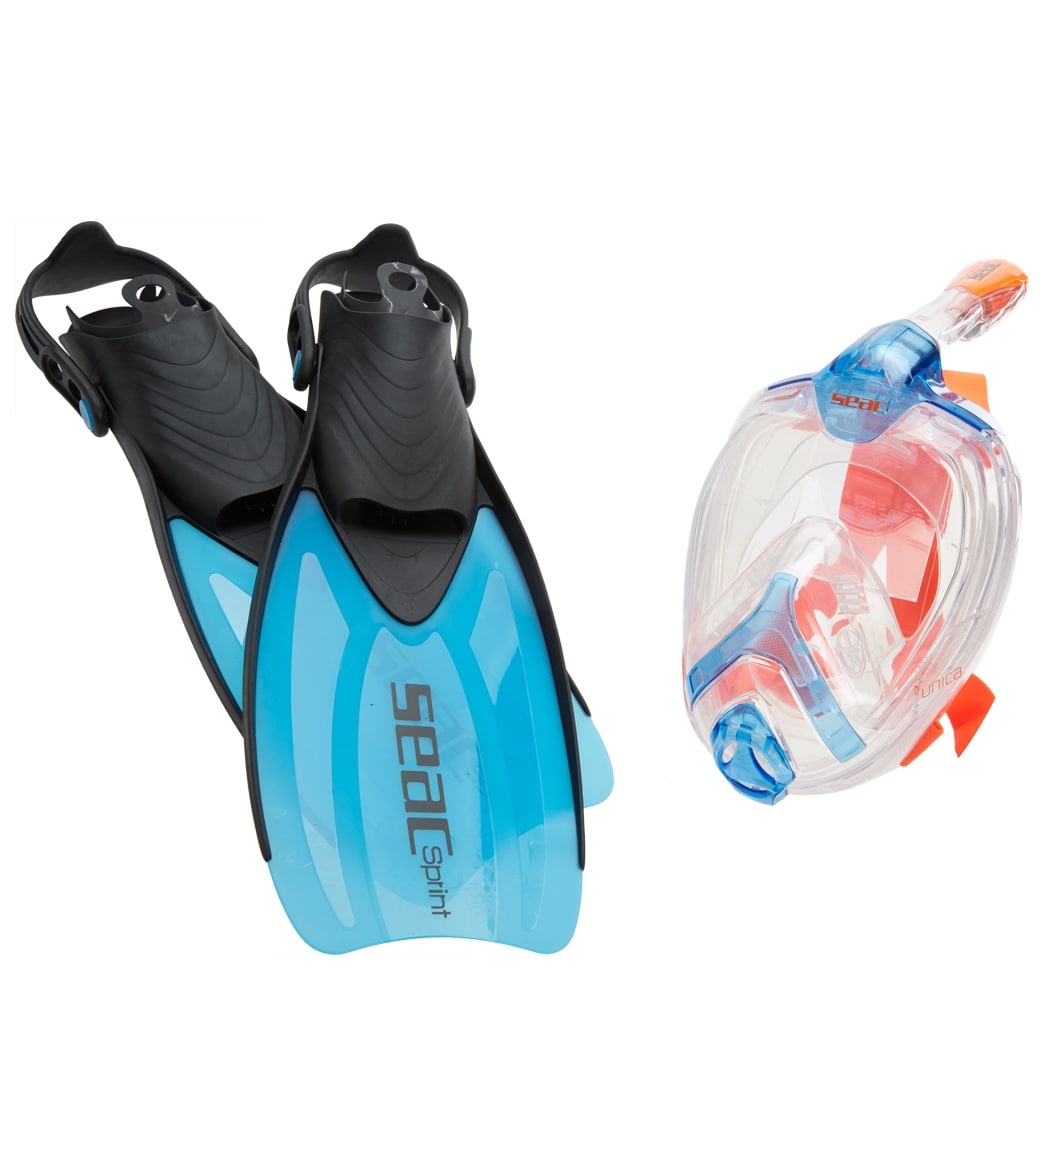 Seac Usa Unica Full Face Snorkeling Mask And Sprint Fin Set - Blue X-Small/Small - Swimoutlet.com